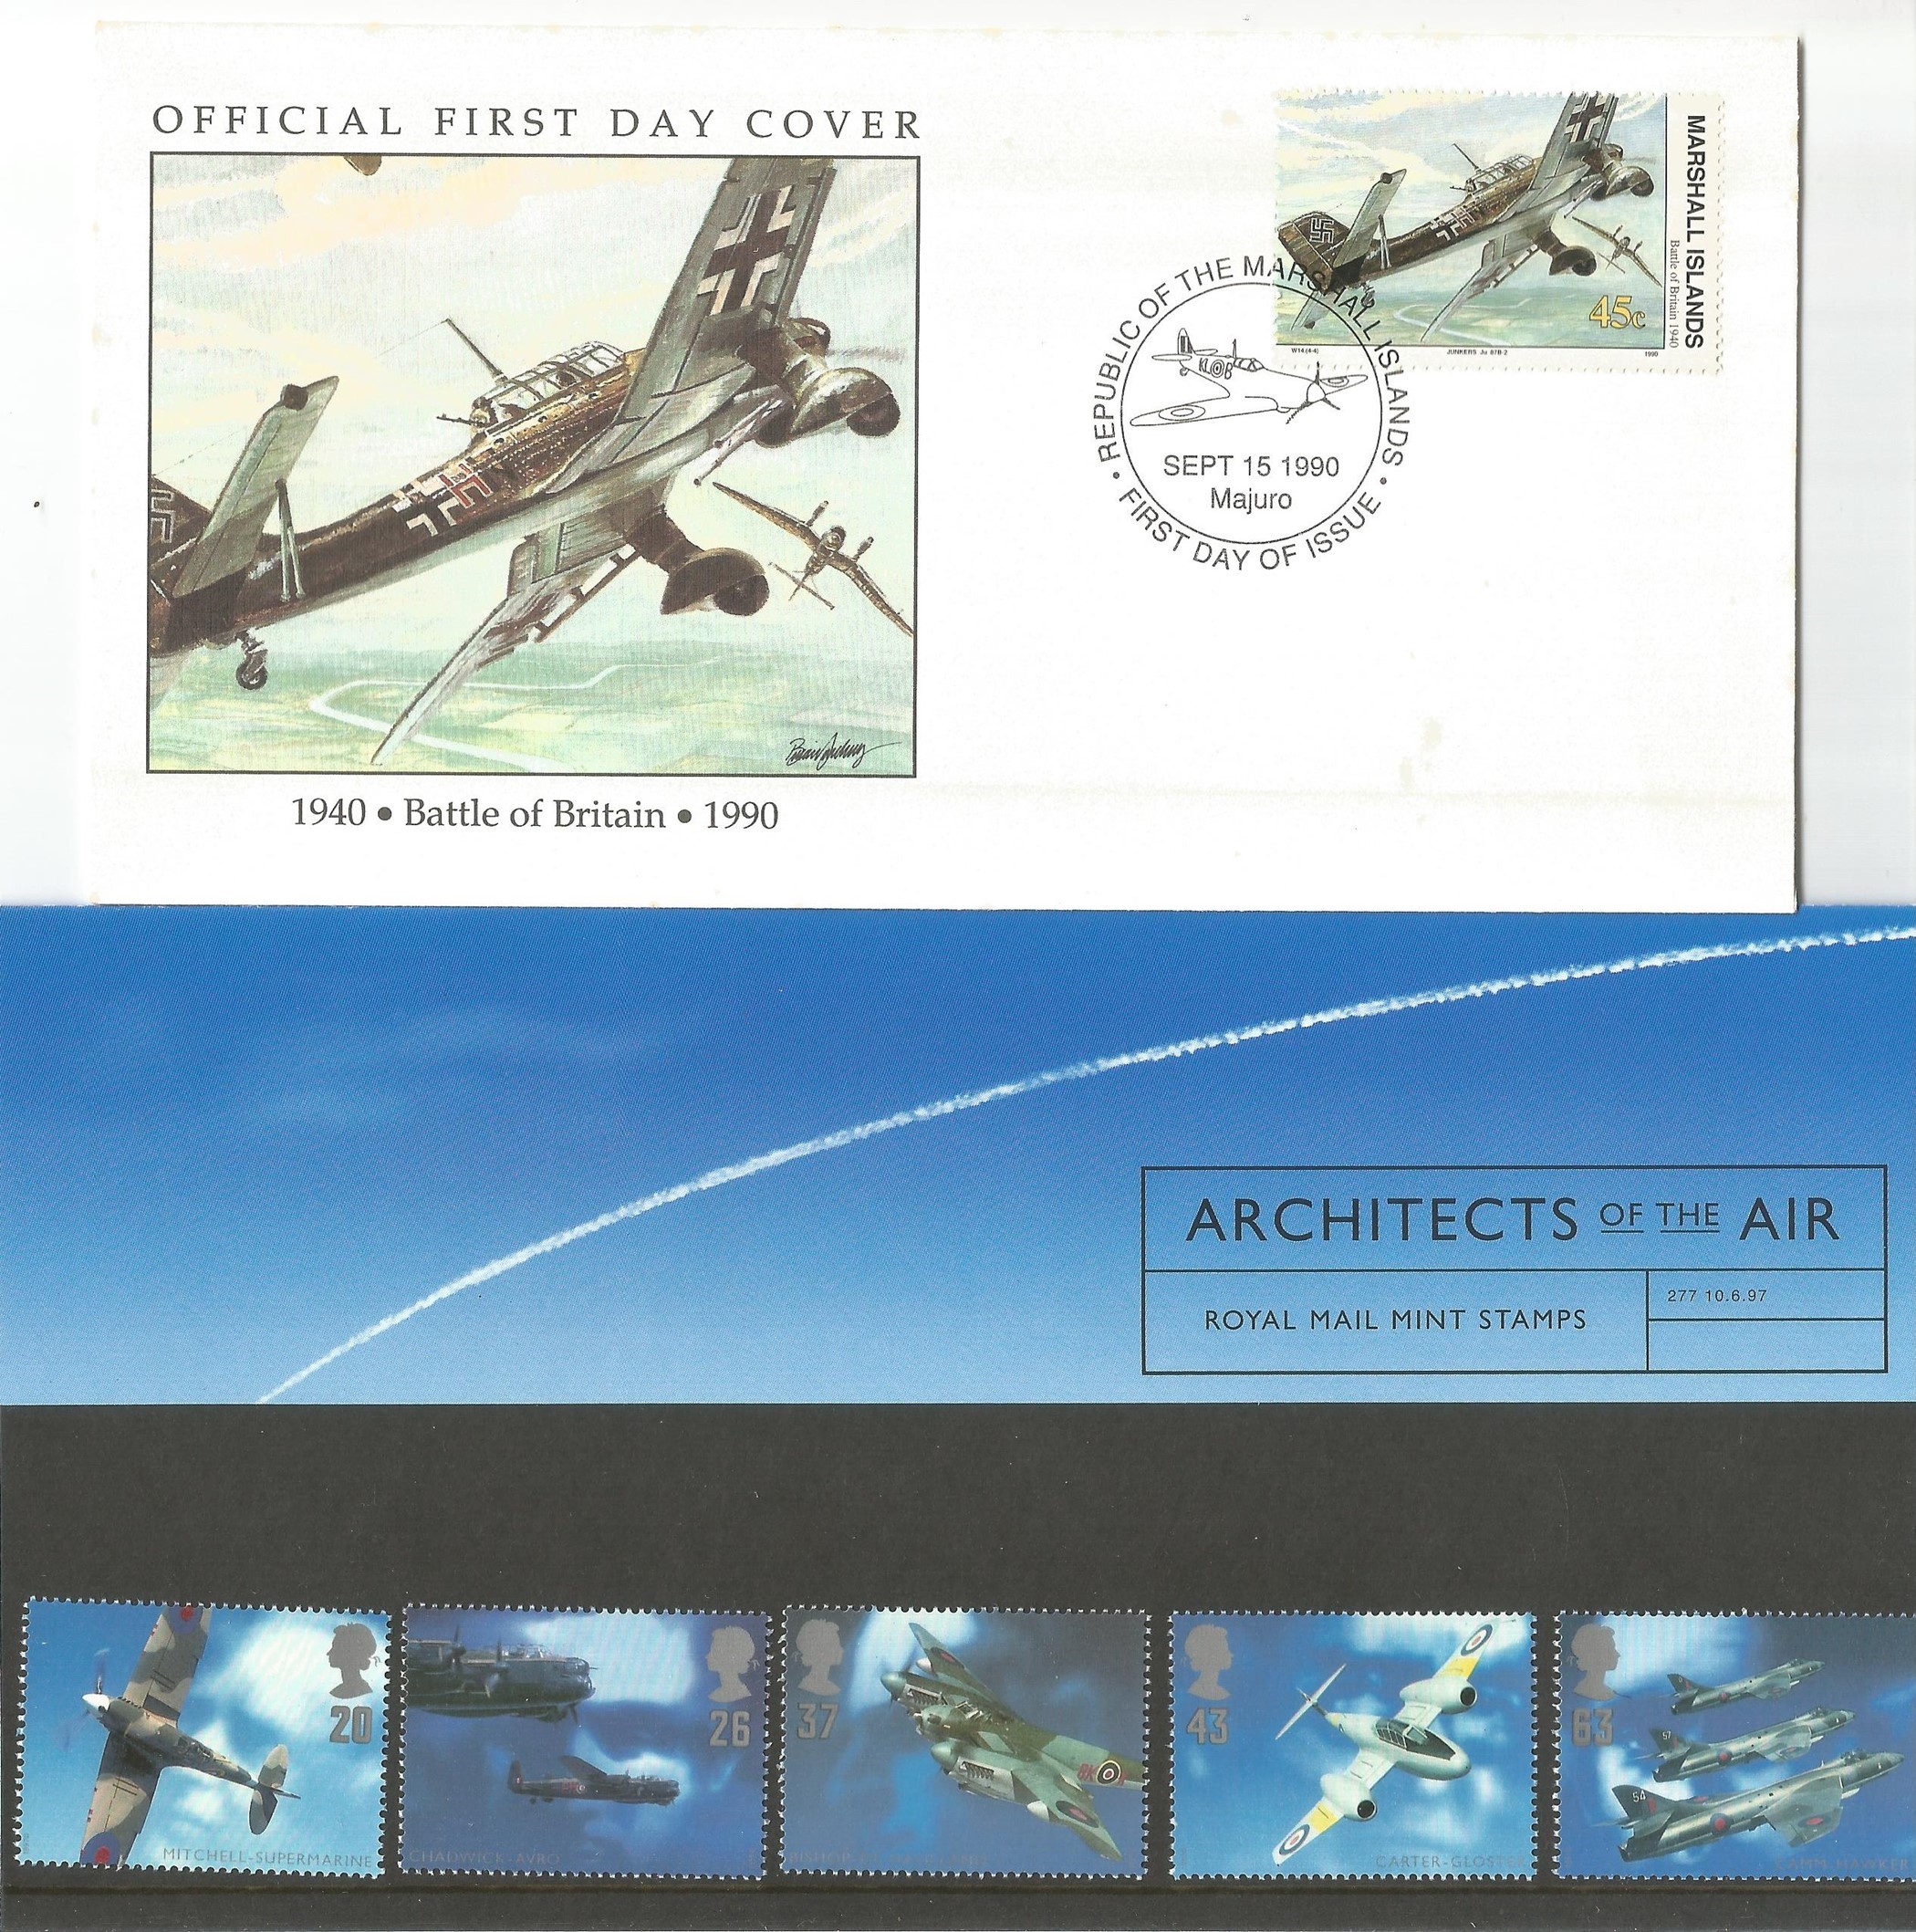 WW2 Collection of 24 Unsigned Flown covers Inc Benham covers. All FDC s Have Official postmark - Image 4 of 5